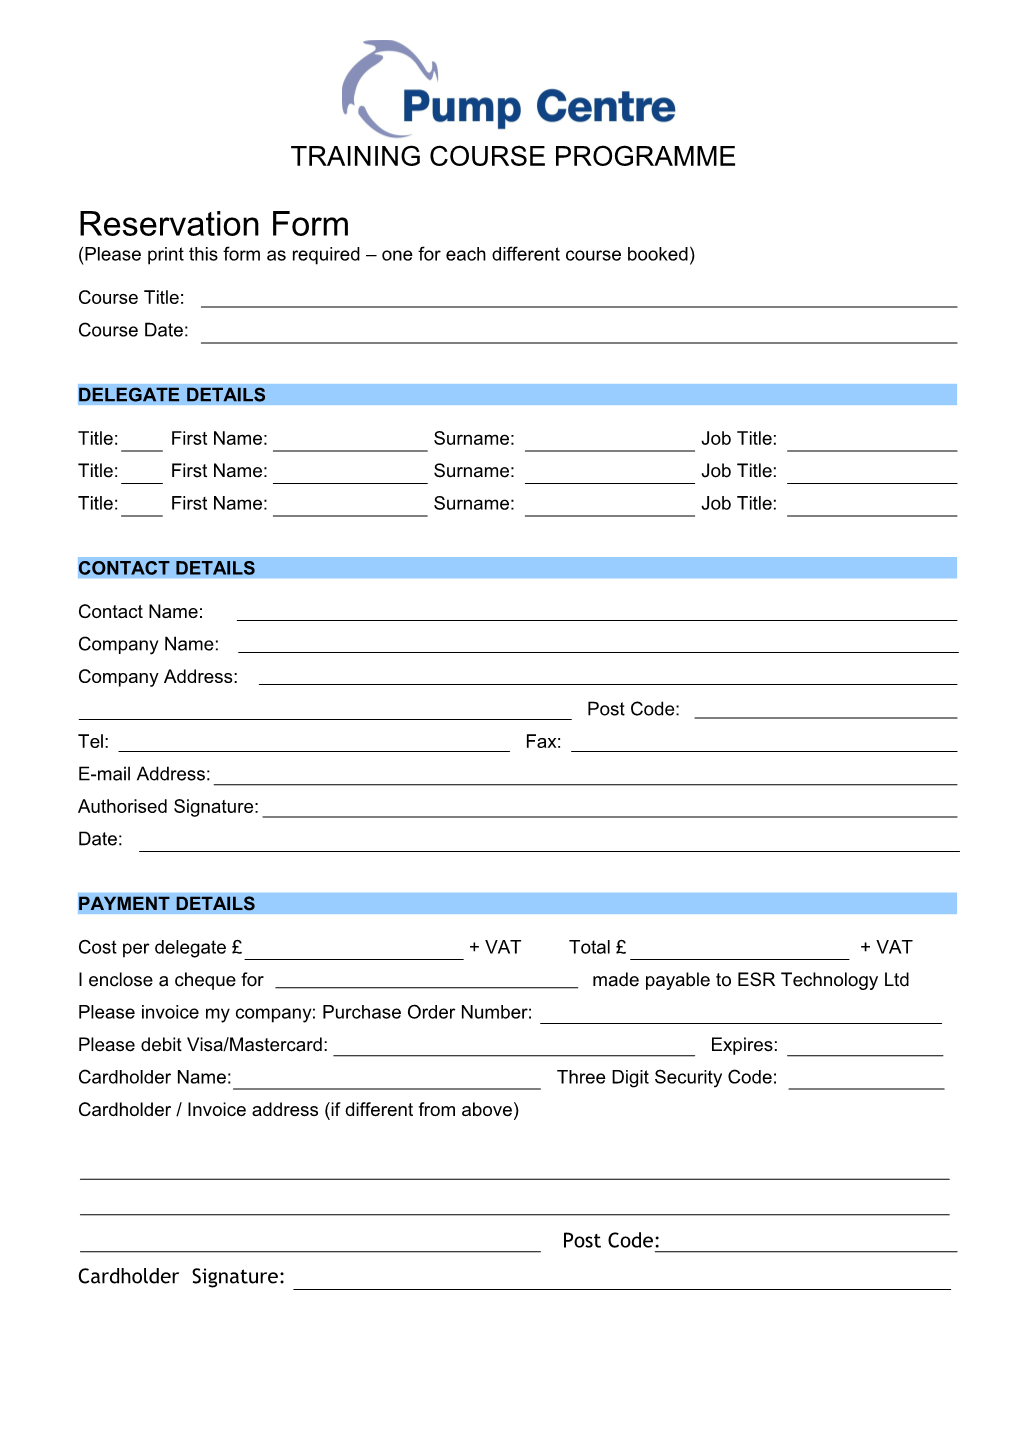 Please Print This Form As Required One for Each Different Course Booked